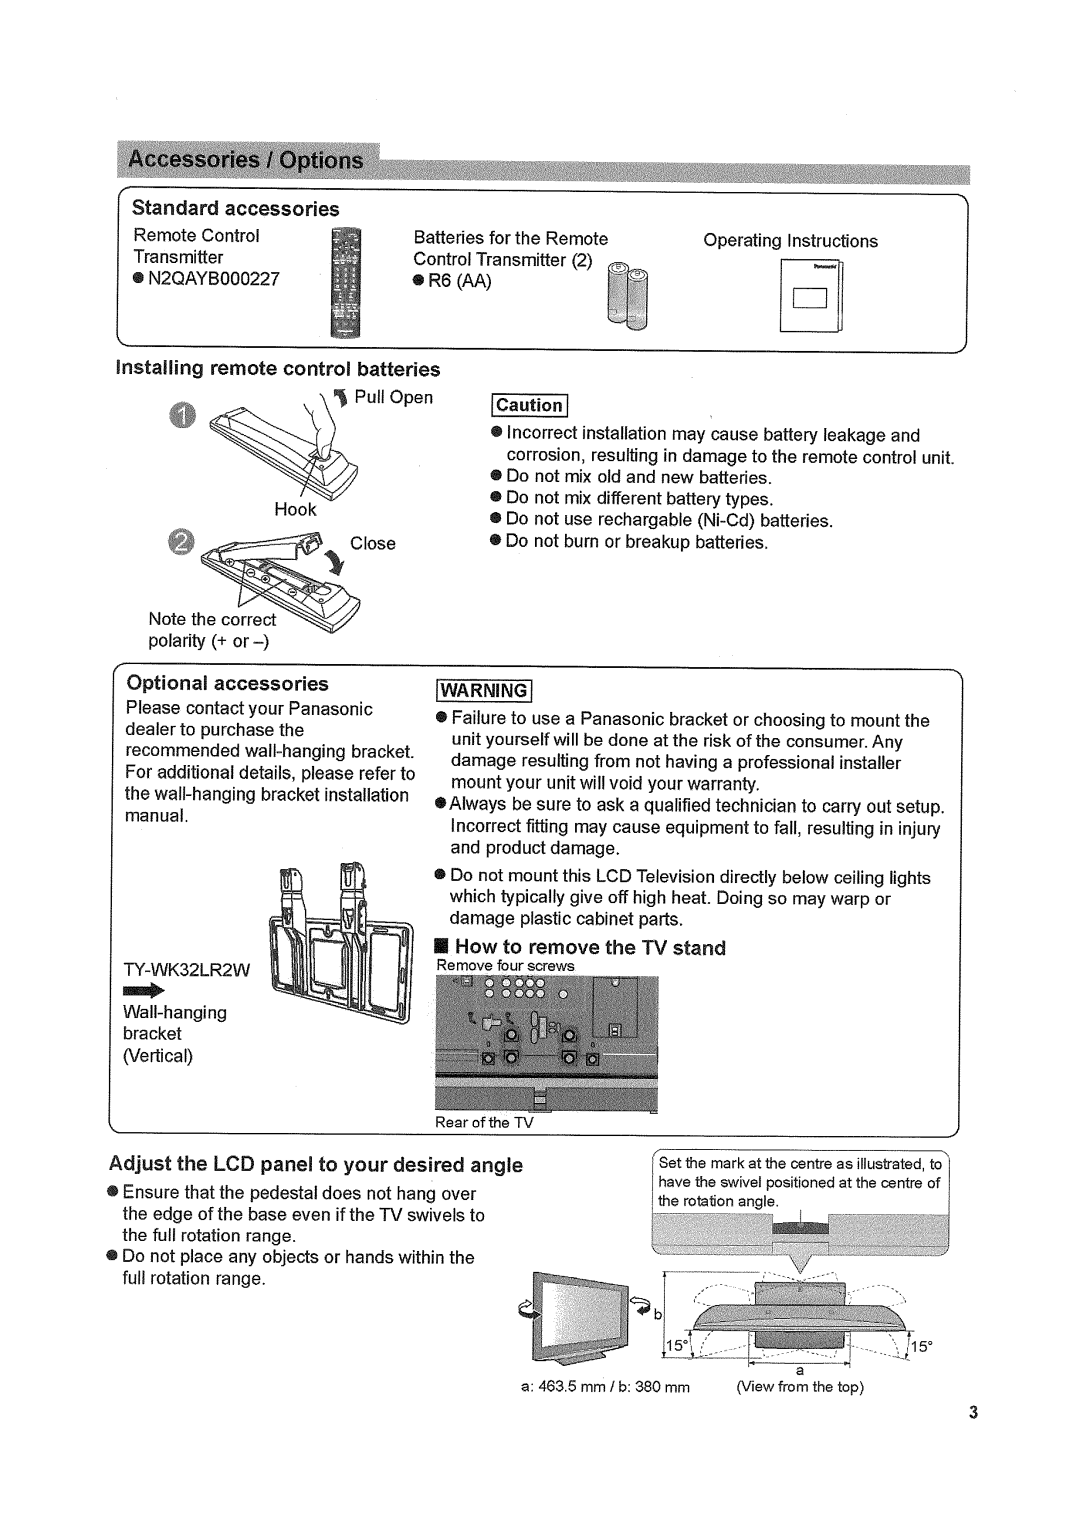 Panasonic TX32LX80 manual Standardaccessories, Icautionj, Optional accessories, How to remove the TV stand 